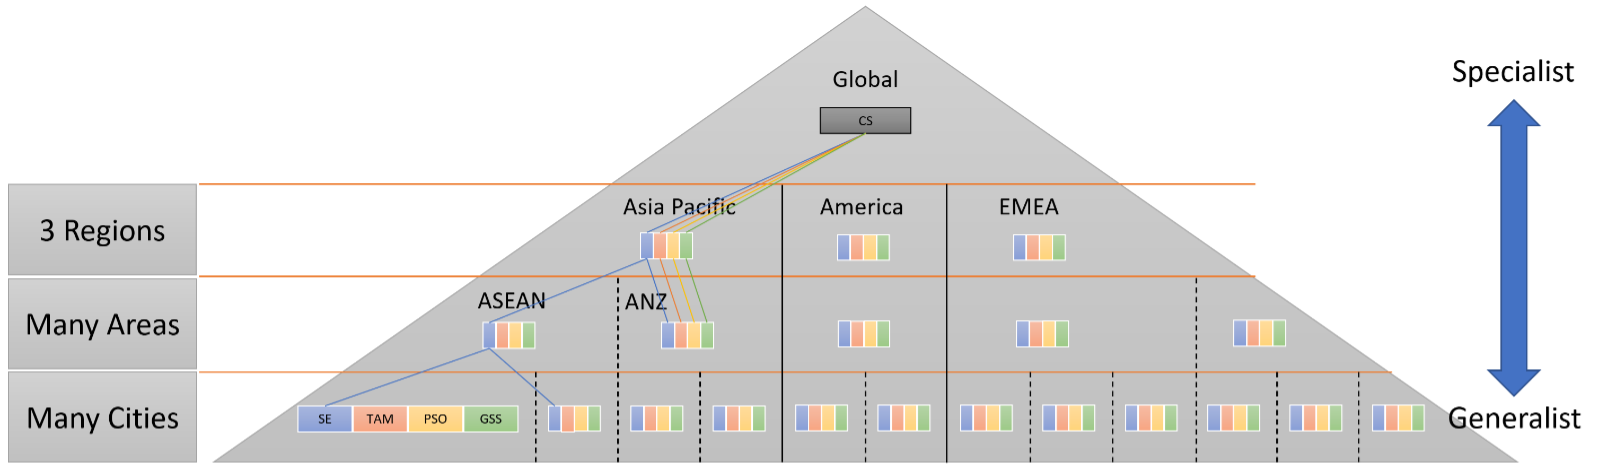 Global role diagram